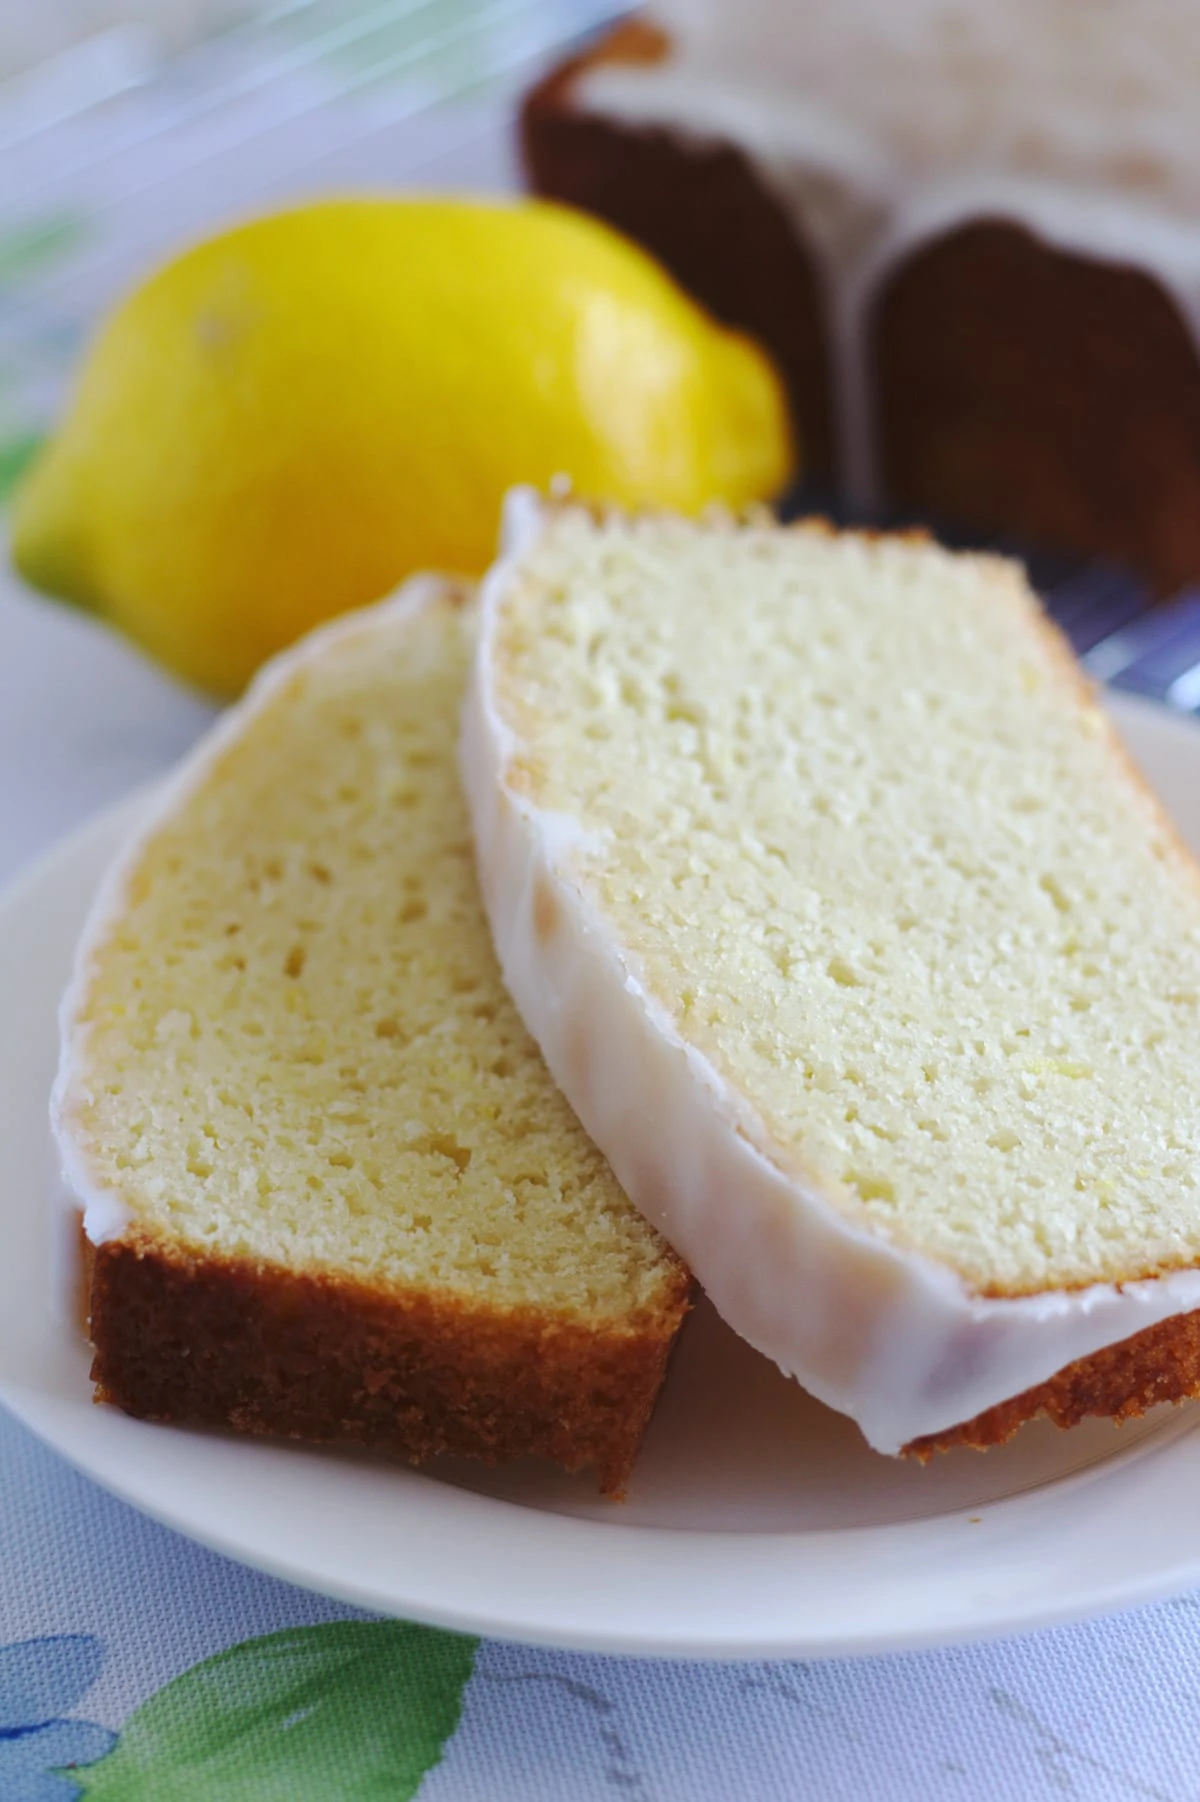 Two slices of lemon cake served on a white plate